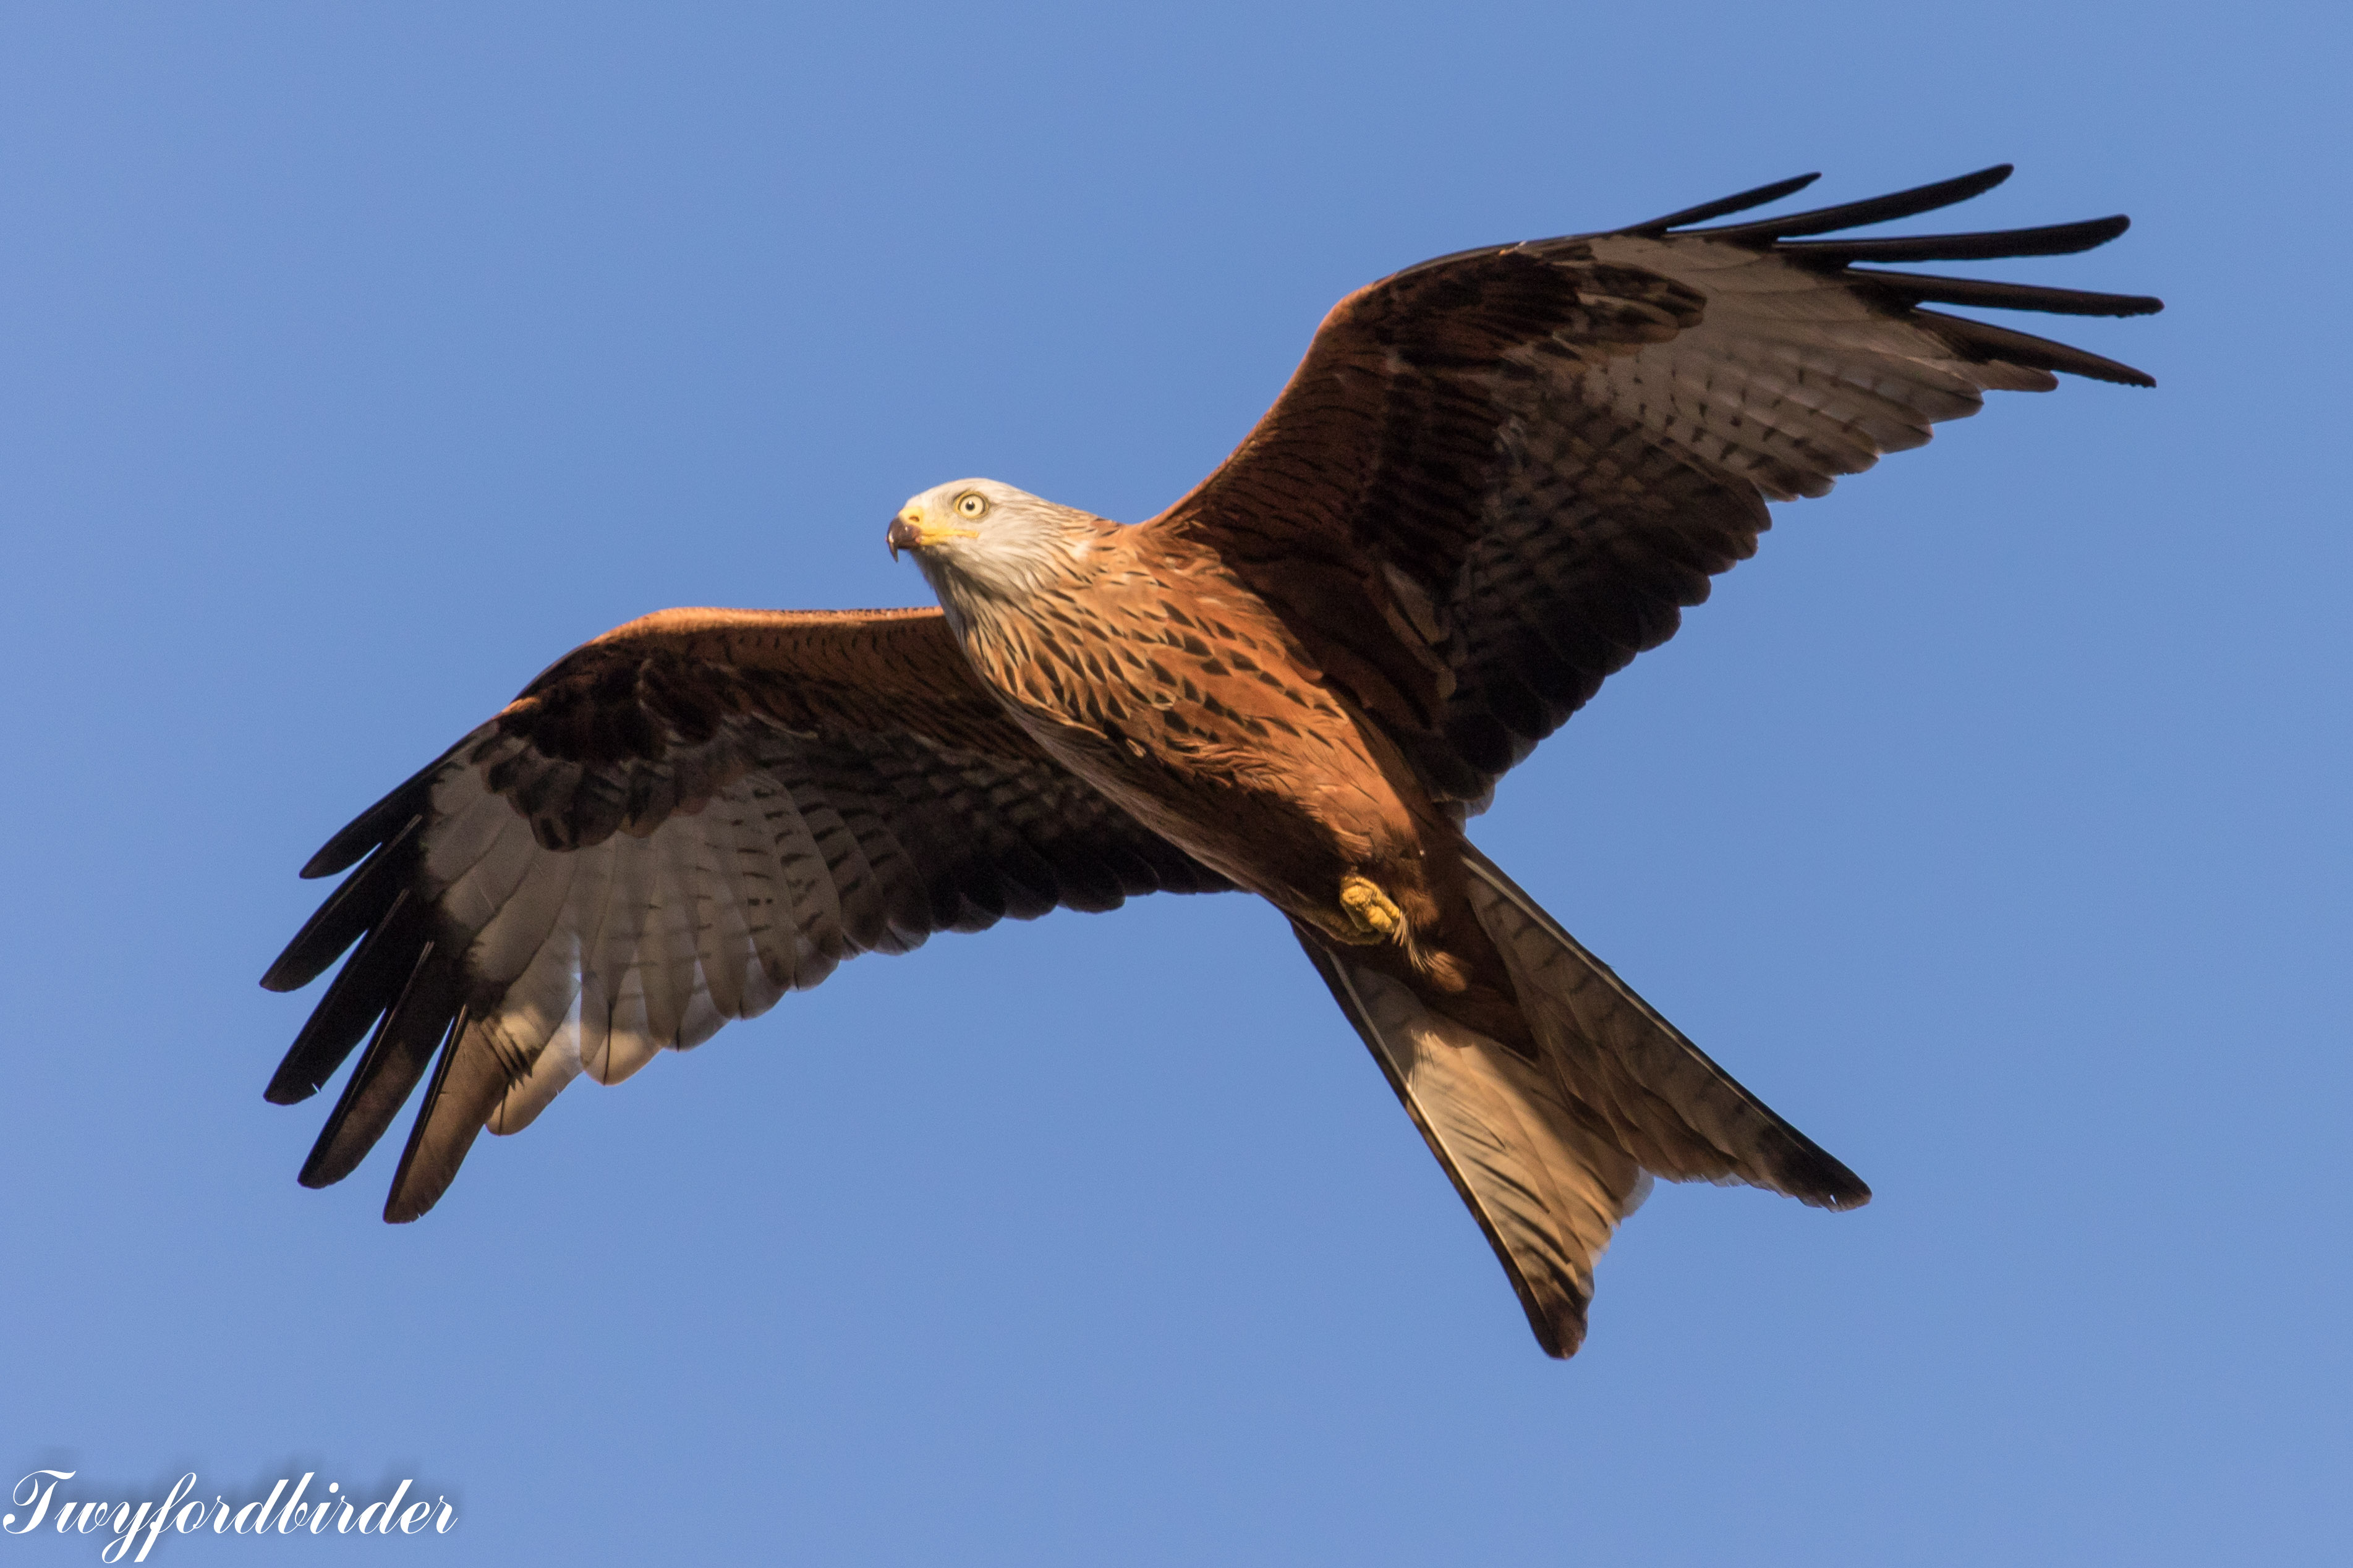 Red kites - Ask an expert - Wildlife - The RSPB Community